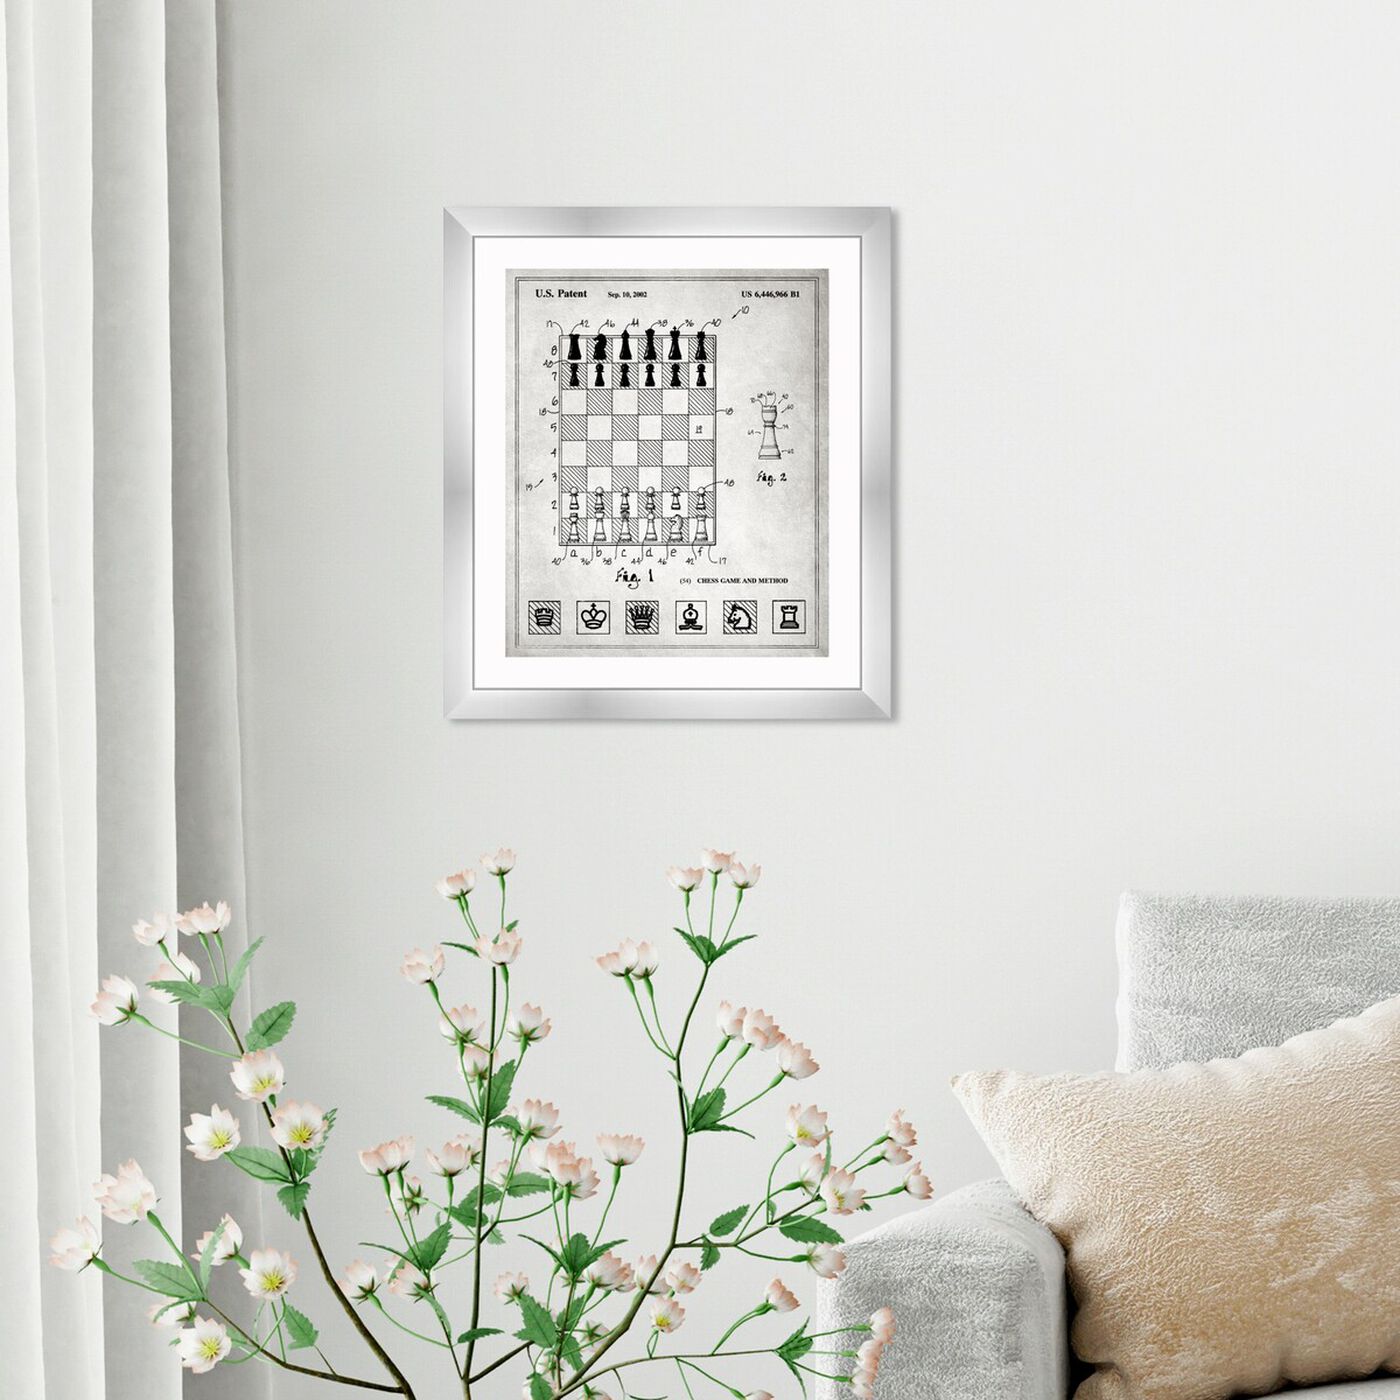 Hanging view of Chess Game and Method 2000 art.